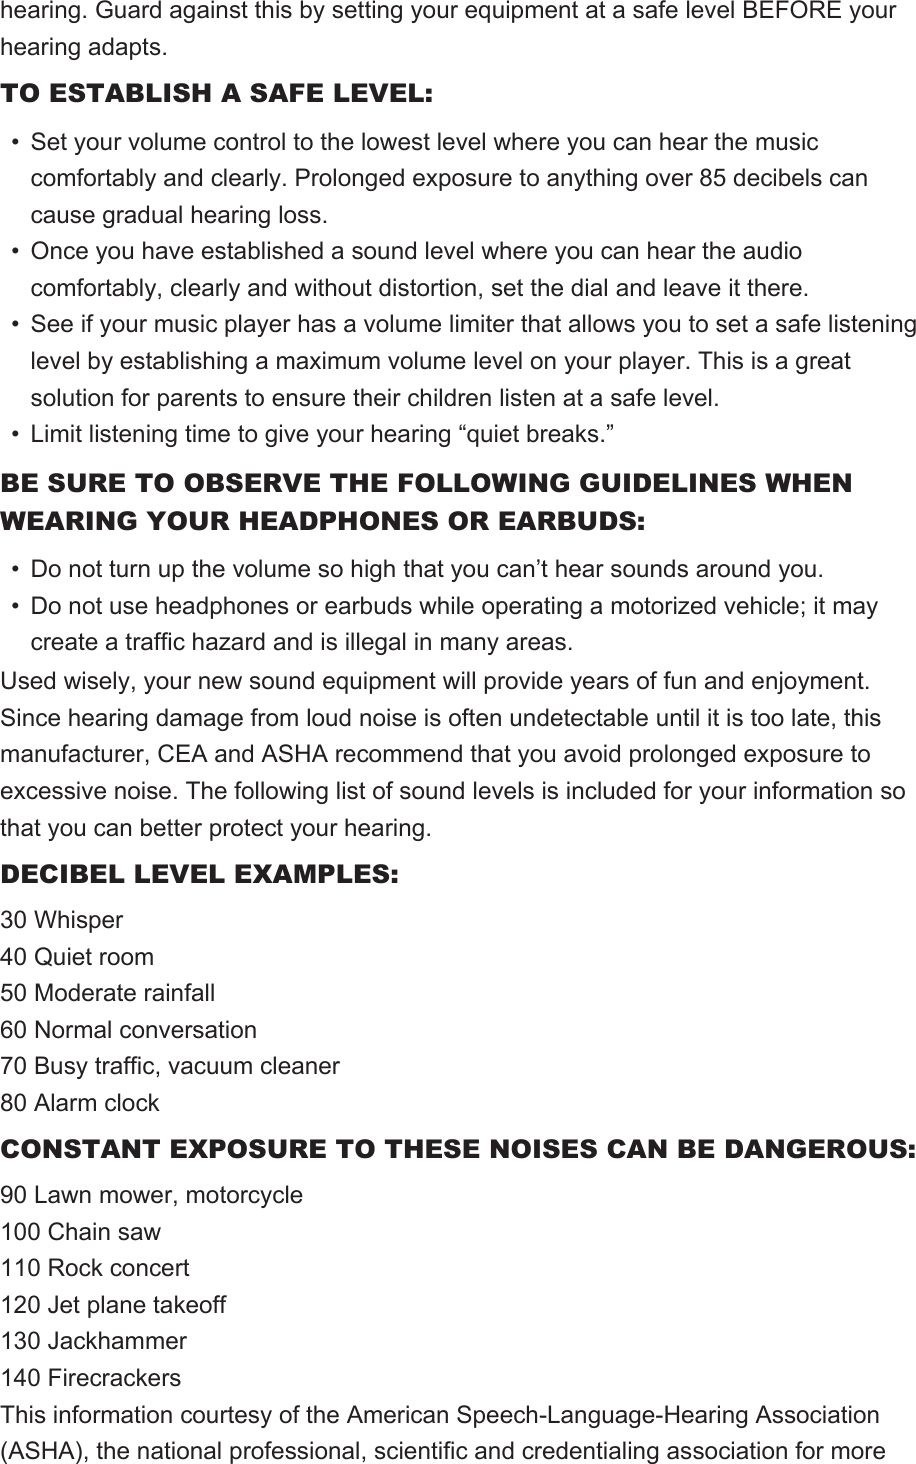 hearing. Guard against this by setting your equipment at a safe level BEFORE your hearing adapts.TO ESTABLISH A SAFE LEVEL:• Set your volume control to the lowest level where you can hear the music comfortably and clearly. Prolonged exposure to anything over 85 decibels can cause gradual hearing loss.• Once you have established a sound level where you can hear the audio comfortably, clearly and without distortion, set the dial and leave it there.• See if your music player has a volume limiter that allows you to set a safe listening level by establishing a maximum volume level on your player. This is a great solution for parents to ensure their children listen at a safe level.• Limit listening time to give your hearing “quiet breaks.”BE SURE TO OBSERVE THE FOLLOWING GUIDELINES WHEN WEARING YOUR HEADPHONES OR EARBUDS:• Do not turn up the volume so high that you can’t hear sounds around you.• Do not use headphones or earbuds while operating a motorized vehicle; it may create a traffic hazard and is illegal in many areas.Used wisely, your new sound equipment will provide years of fun and enjoyment.Since hearing damage from loud noise is often undetectable until it is too late, this manufacturer, CEA and ASHA recommend that you avoid prolonged exposure to excessive noise. The following list of sound levels is included for your information so that you can better protect your hearing.DECIBEL LEVEL EXAMPLES:30 Whisper40 Quiet room50 Moderate rainfall60 Normal conversation70 Busy traffic, vacuum cleaner80 Alarm clockCONSTANT EXPOSURE TO THESE NOISES CAN BE DANGEROUS:90 Lawn mower, motorcycle100 Chain saw110 Rock concert120 Jet plane takeoff130 Jackhammer140 FirecrackersThis information courtesy of the American Speech-Language-Hearing Association (ASHA), the national professional, scientific and credentialing association for more 